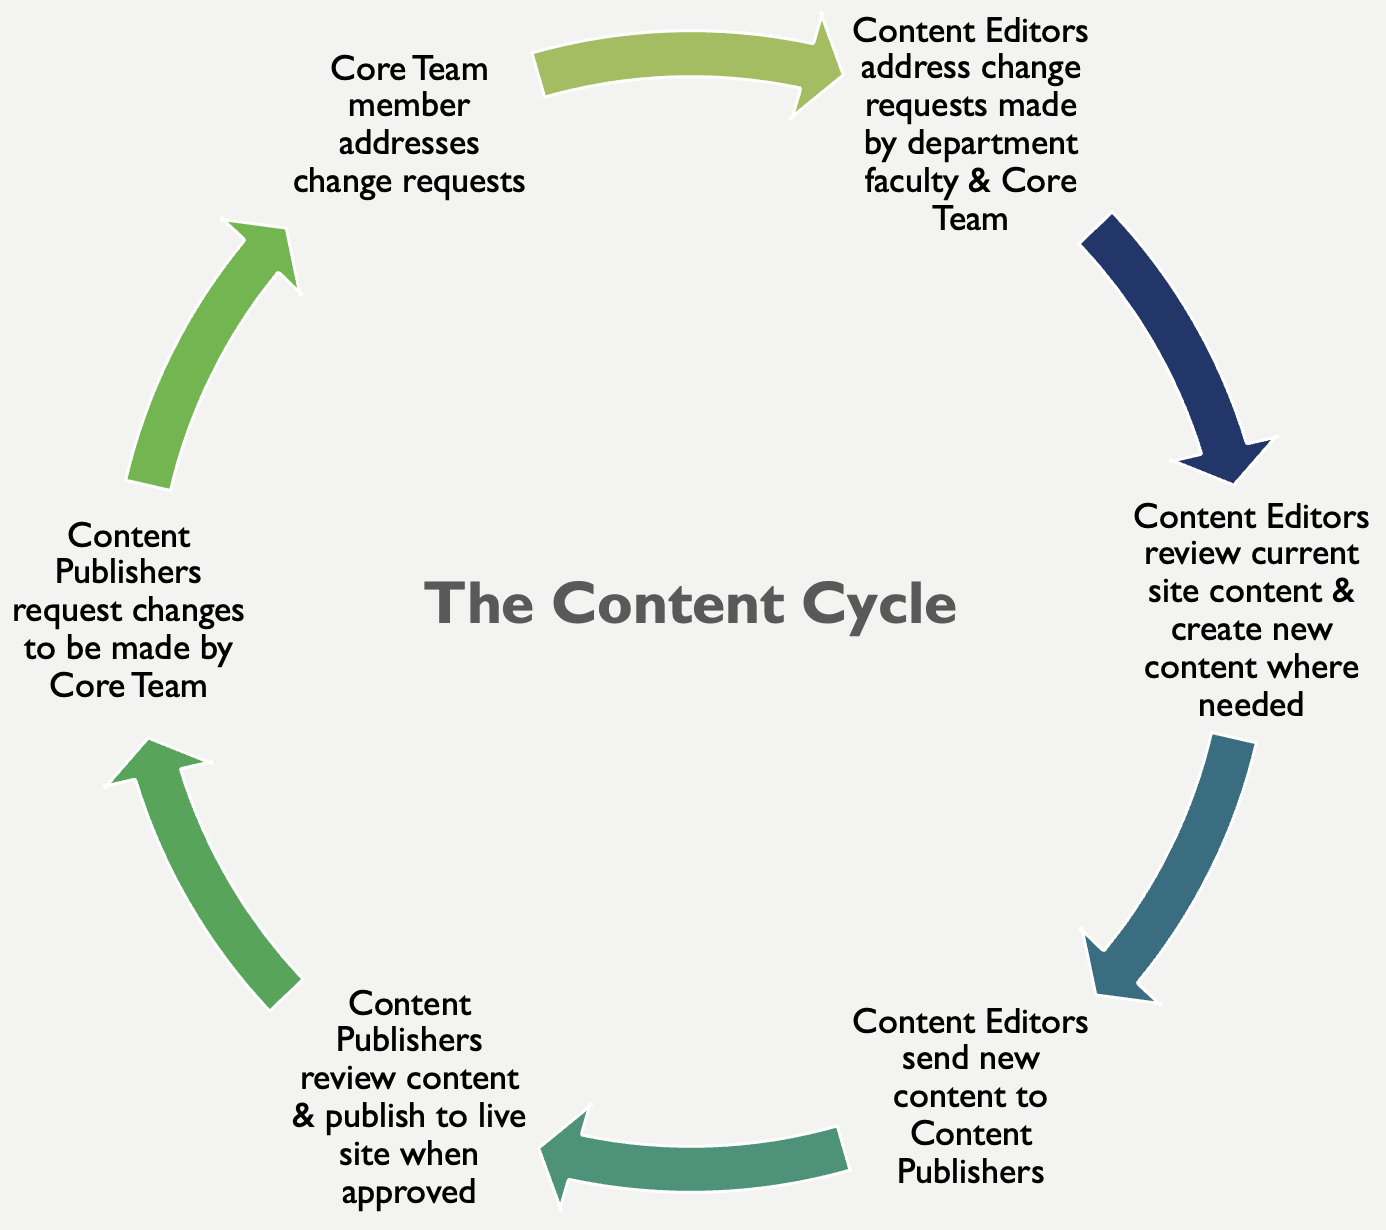 Web Ambassadors Network Content Cycle: 1: Content Editors address change requests made by department faculty and core team. 2: Content editors review current site content and create new content where needed. 3: content editors send new content to content publishers. 4: content publishers review content and publish to live site when approved. 5: content publishers request changes to be made by the core team. 6: core team member addresses change requests.